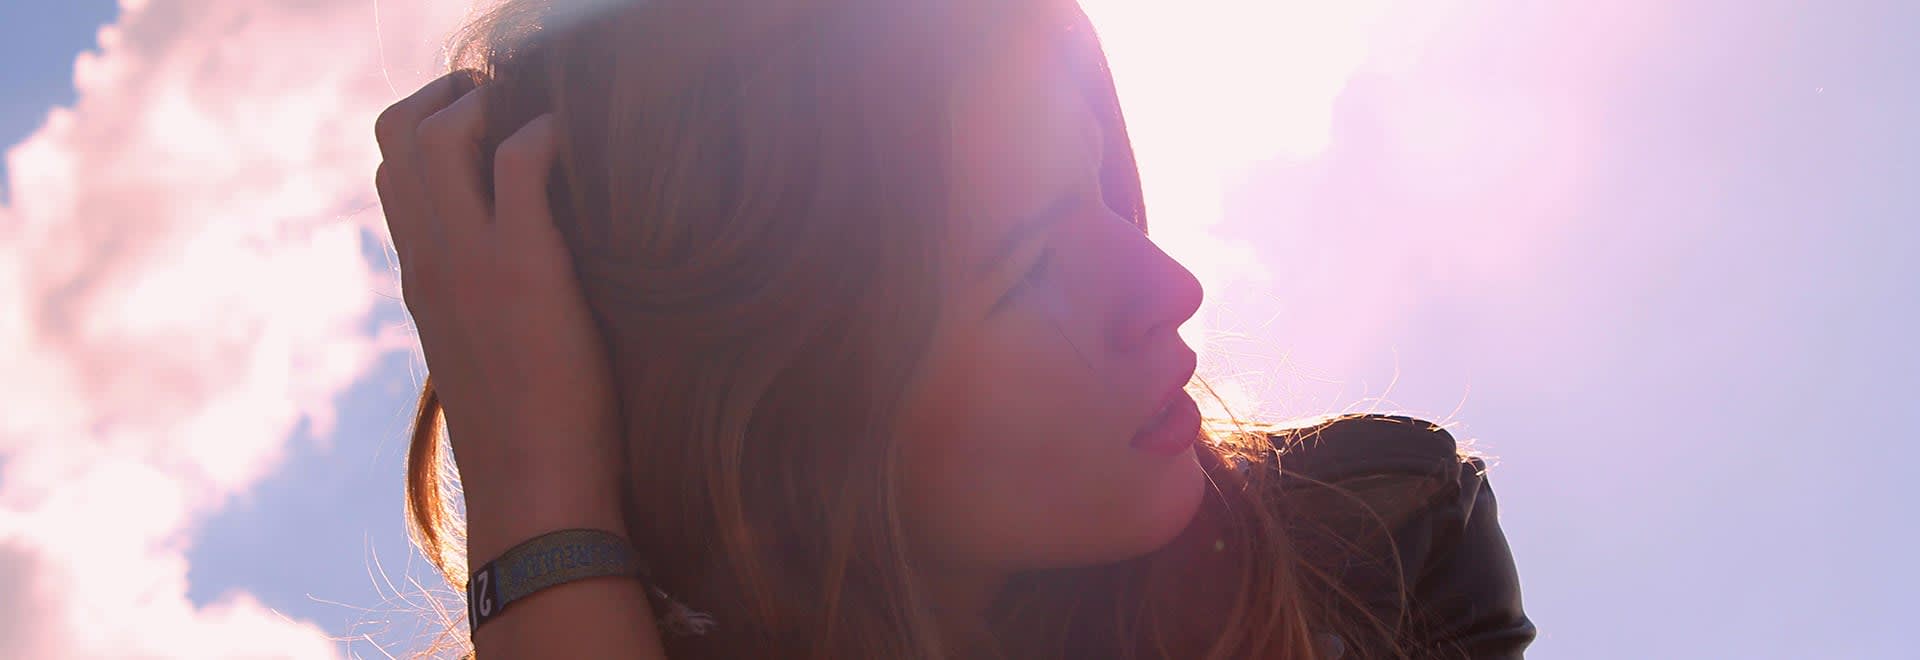 A photo of woman touching her head with a sunlight hitting the camera and a sunset in the background